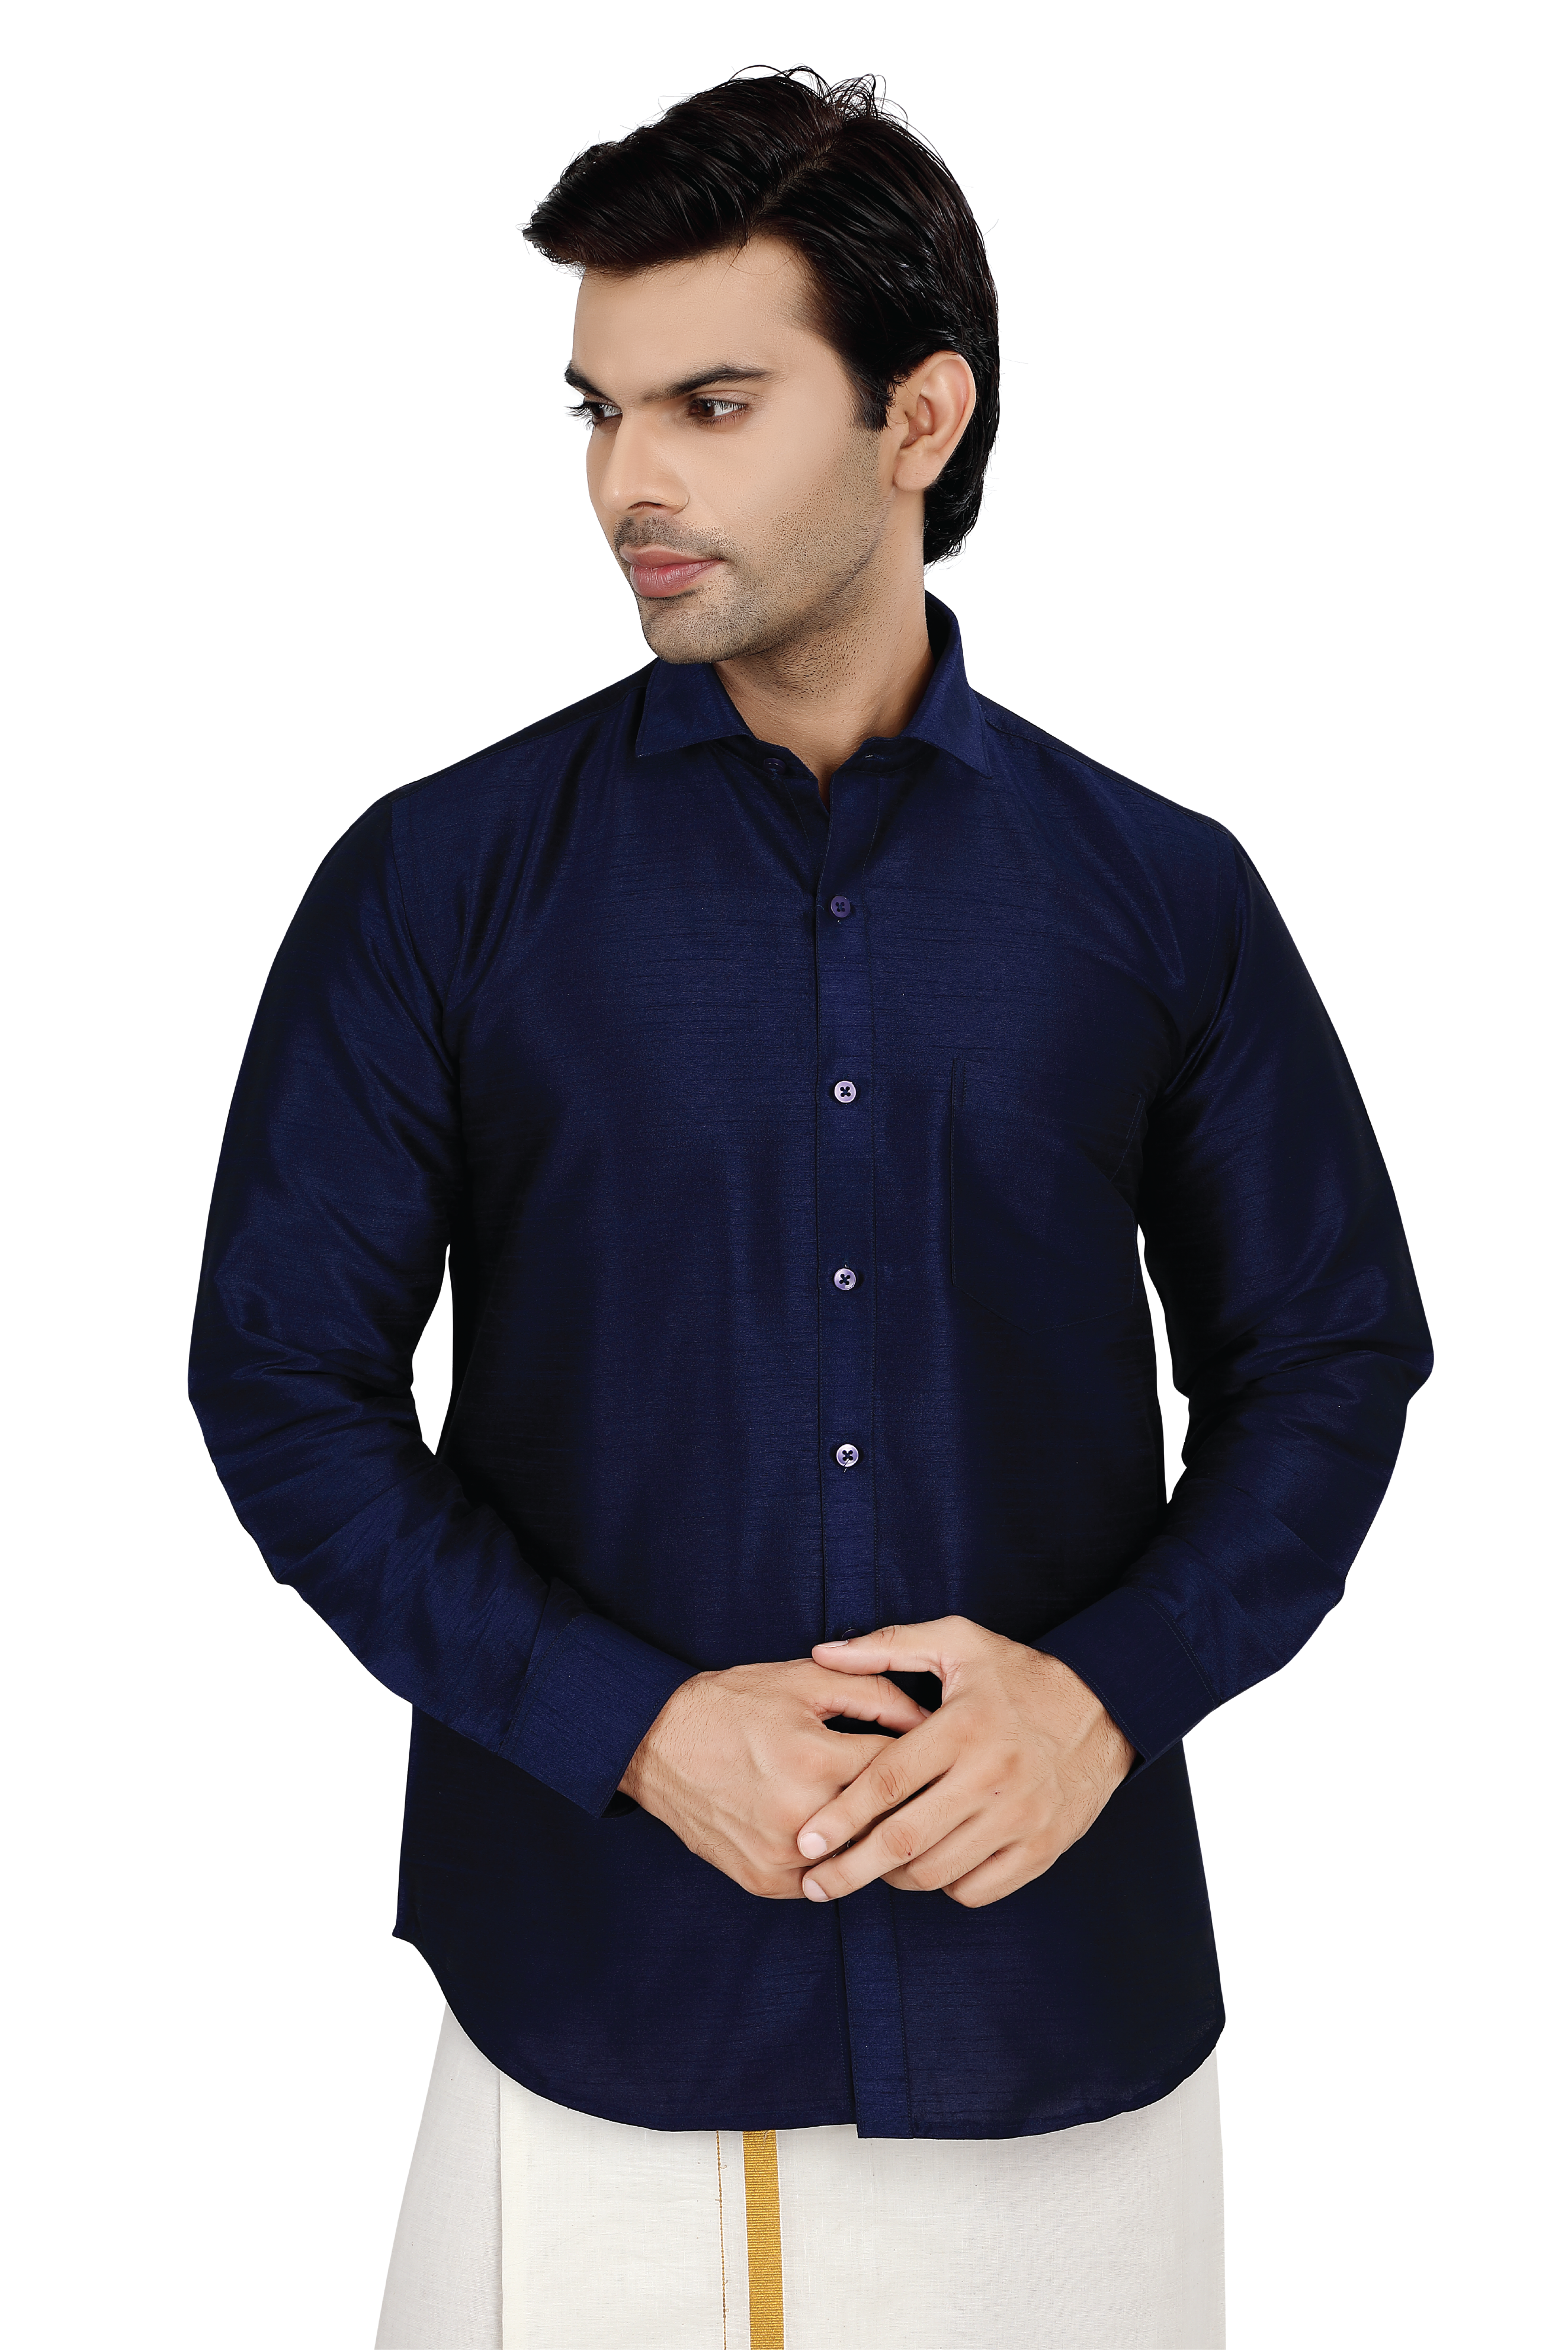 Dupion Silk Shirt in Navy Blue Full sleeves with Dhoti